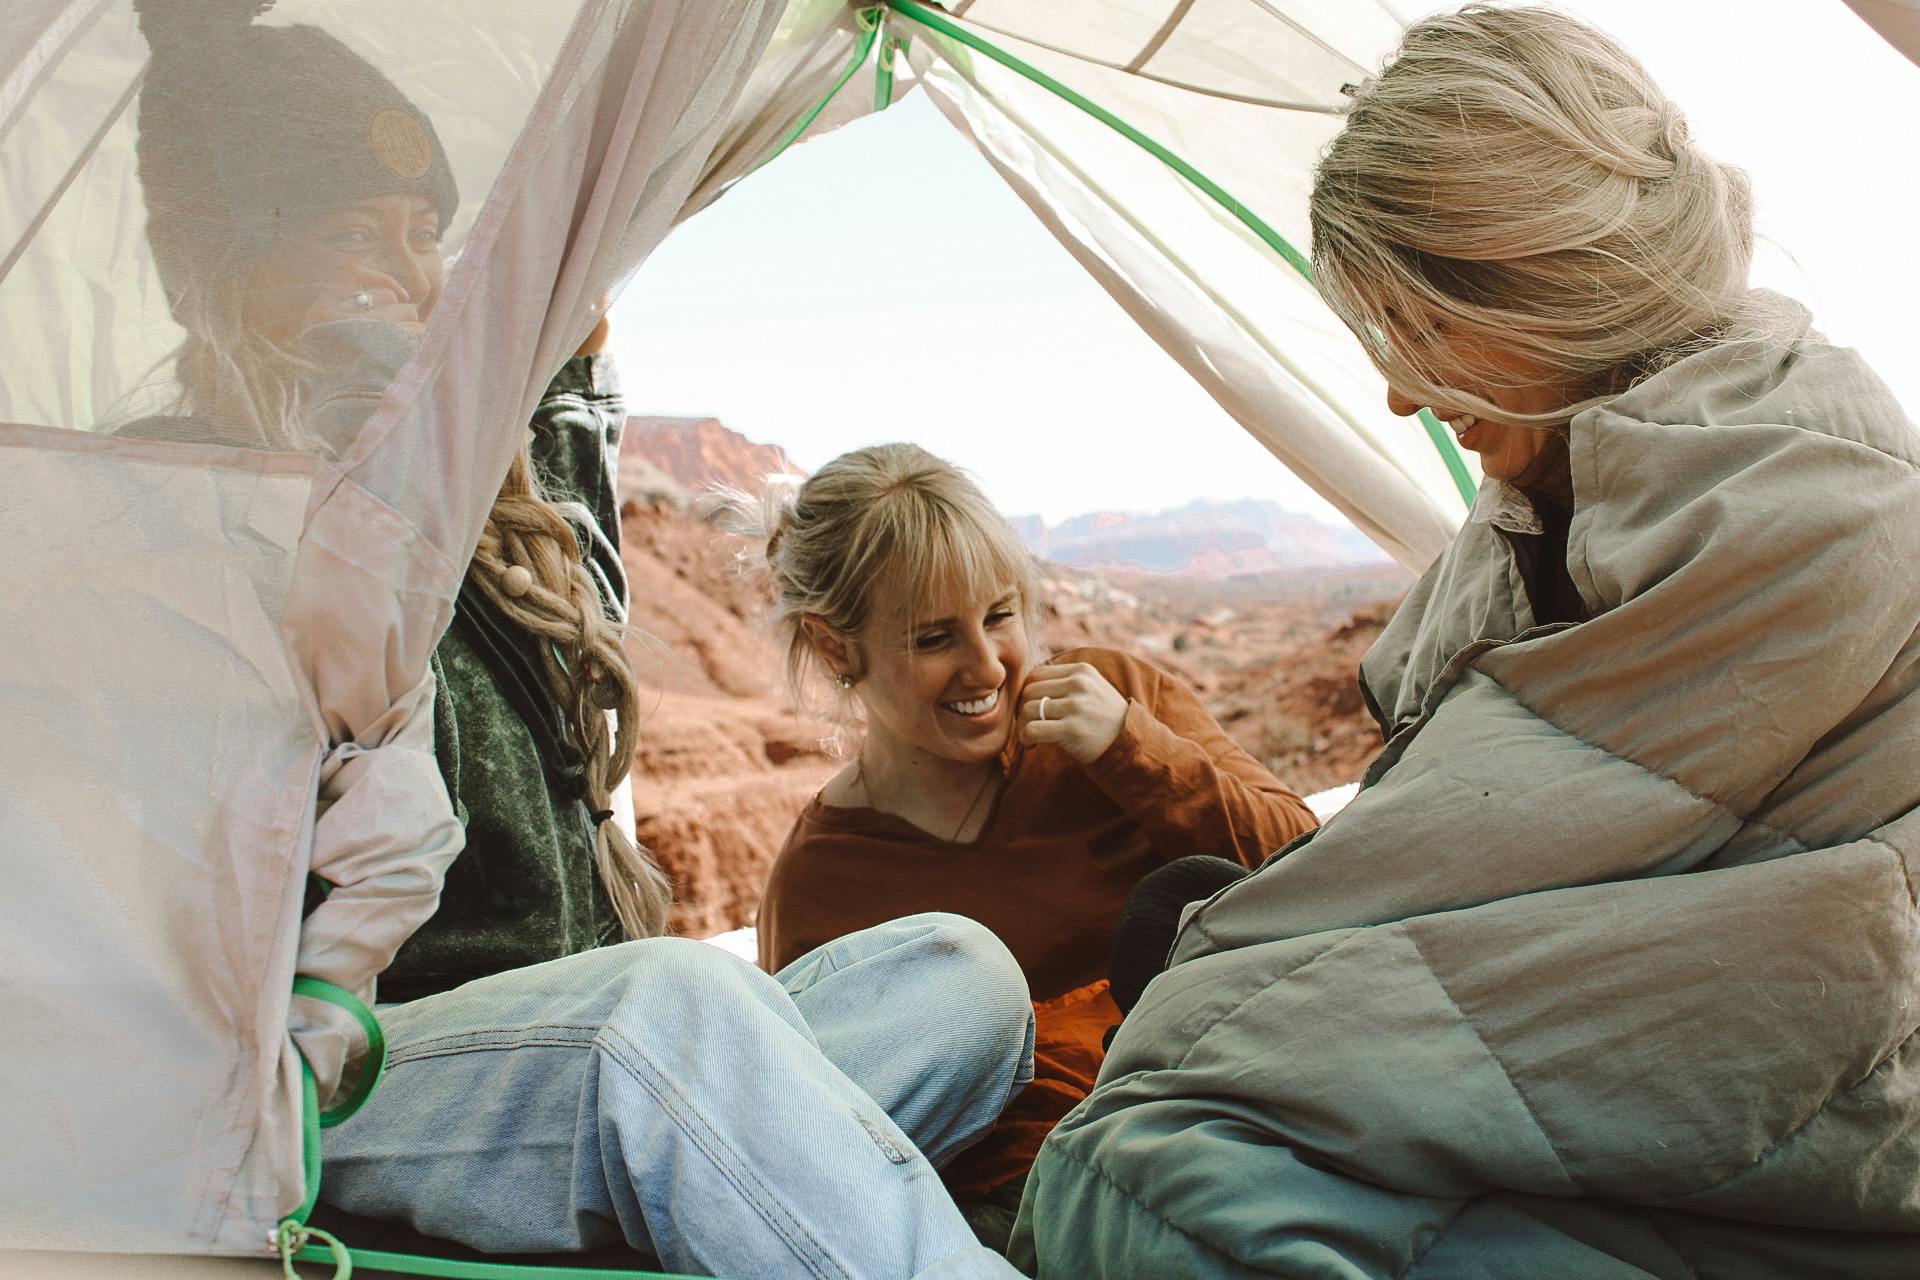 Three girls sit in a tent laughing. There are blankets in the tent and one person is wearing a blanket around their shoulders. 